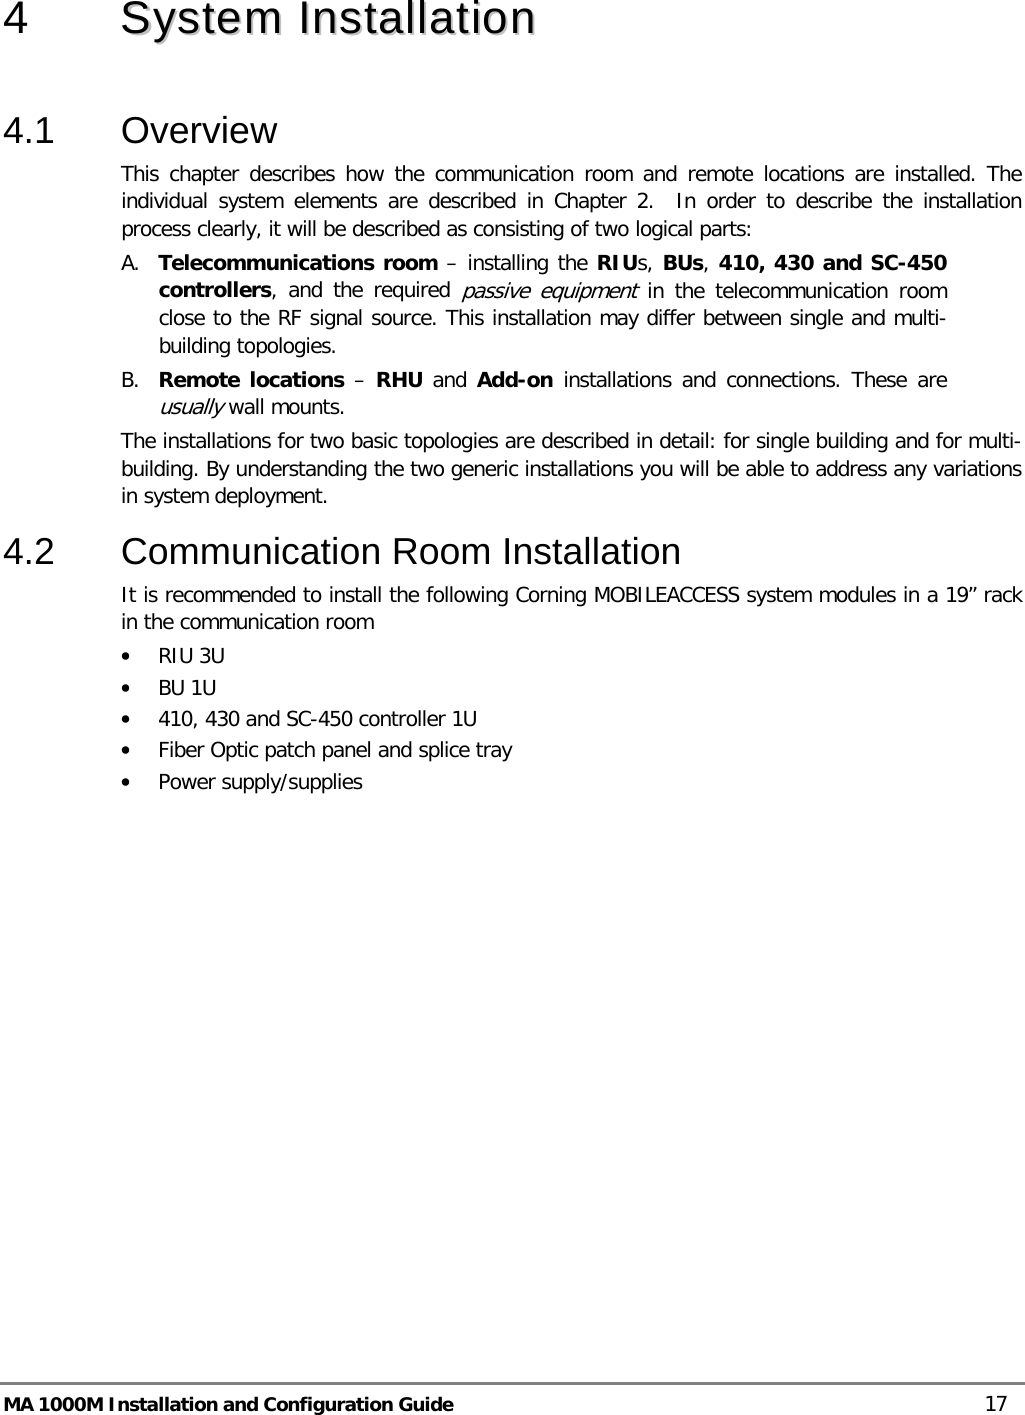  MA 1000M Installation and Configuration Guide    17 4  SSyysstteemm  IInnssttaallllaattiioonn   4.1  Overview This chapter describes how the communication room and remote locations are installed. The individual system elements are described in Chapter 2.  In order to describe the installation process clearly, it will be described as consisting of two logical parts:  A. Telecommunications room – installing the RIUs, BUs, 410, 430 and SC-450 controllers, and the required passive equipment in the telecommunication room close to the RF signal source. This installation may differ between single and multi-building topologies. B. Remote locations – RHU  and Add-on installations and connections. These are usually wall mounts.  The installations for two basic topologies are described in detail: for single building and for multi-building. By understanding the two generic installations you will be able to address any variations in system deployment. 4.2  Communication Room Installation It is recommended to install the following Corning MOBILEACCESS system modules in a 19” rack in the communication room • RIU 3U • BU 1U  • 410, 430 and SC-450 controller 1U • Fiber Optic patch panel and splice tray • Power supply/supplies 